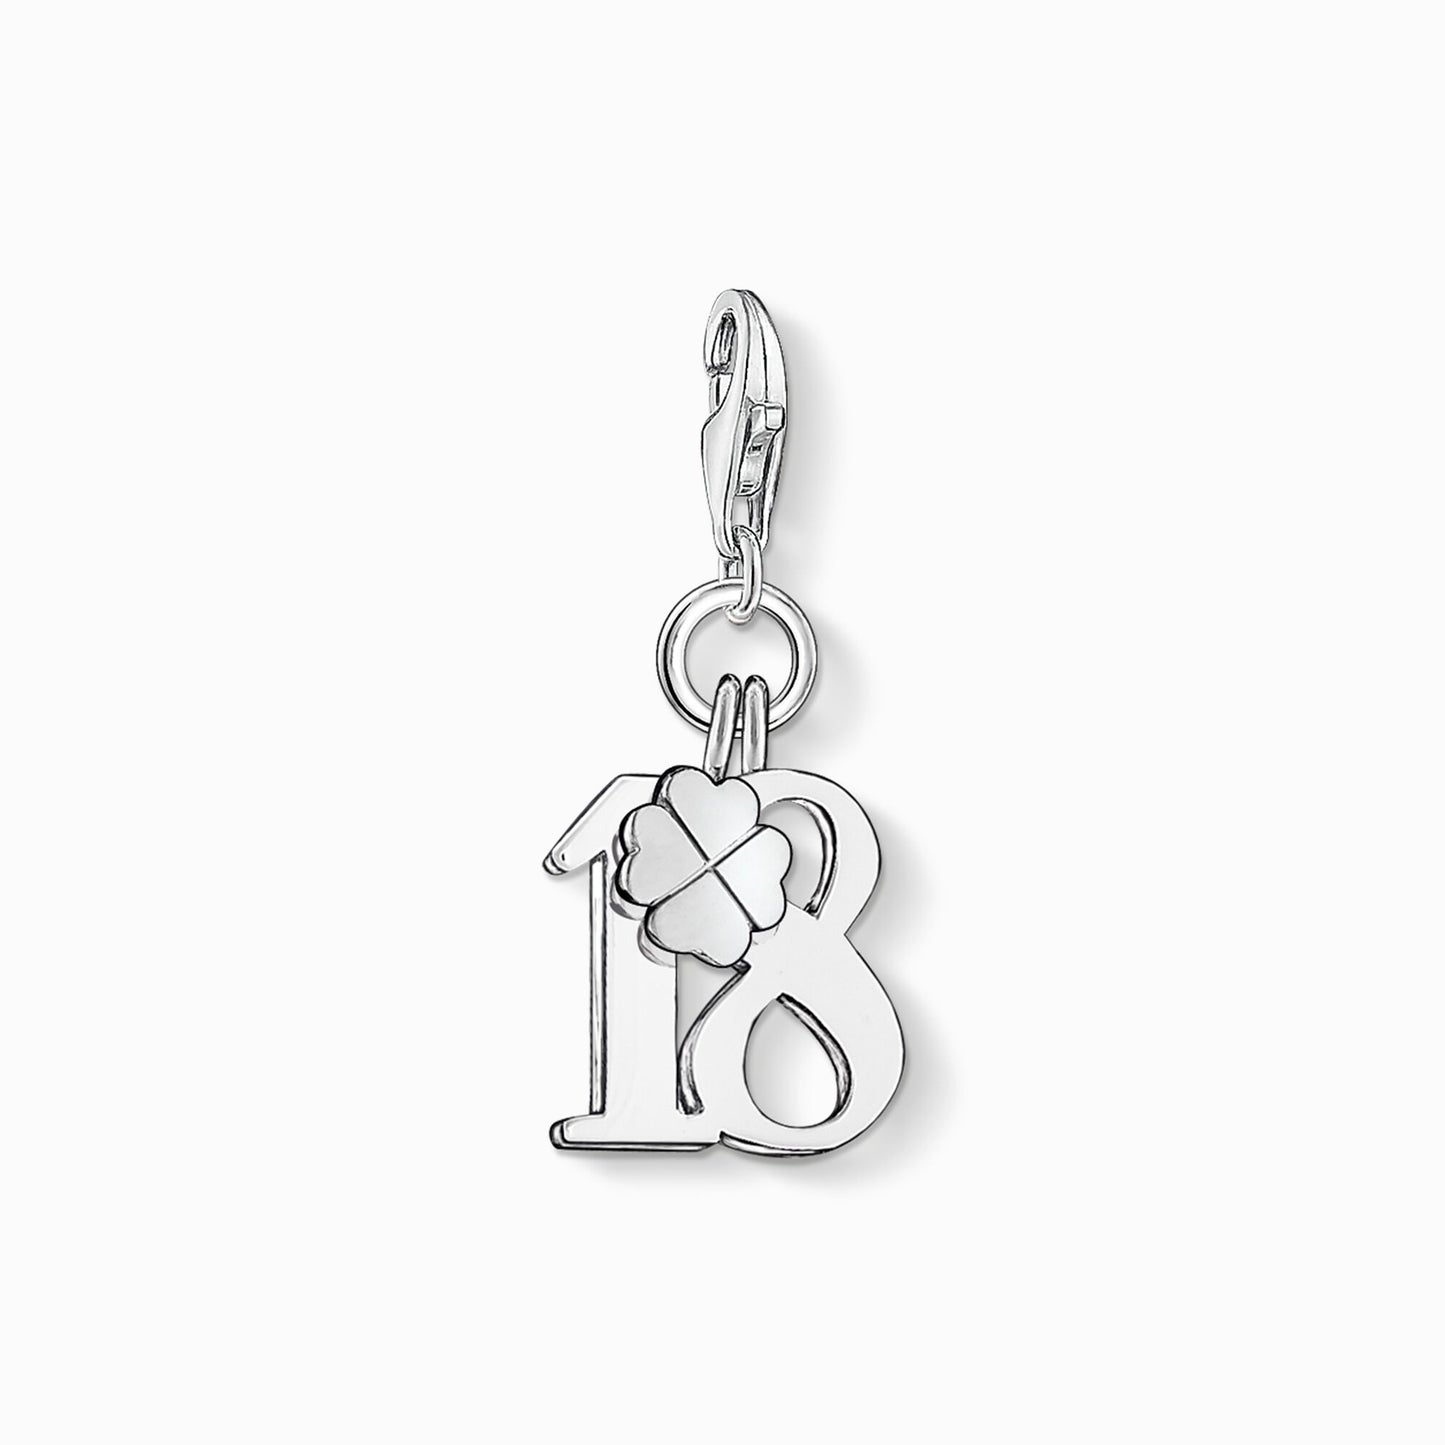 Charm pendant lucky number 18